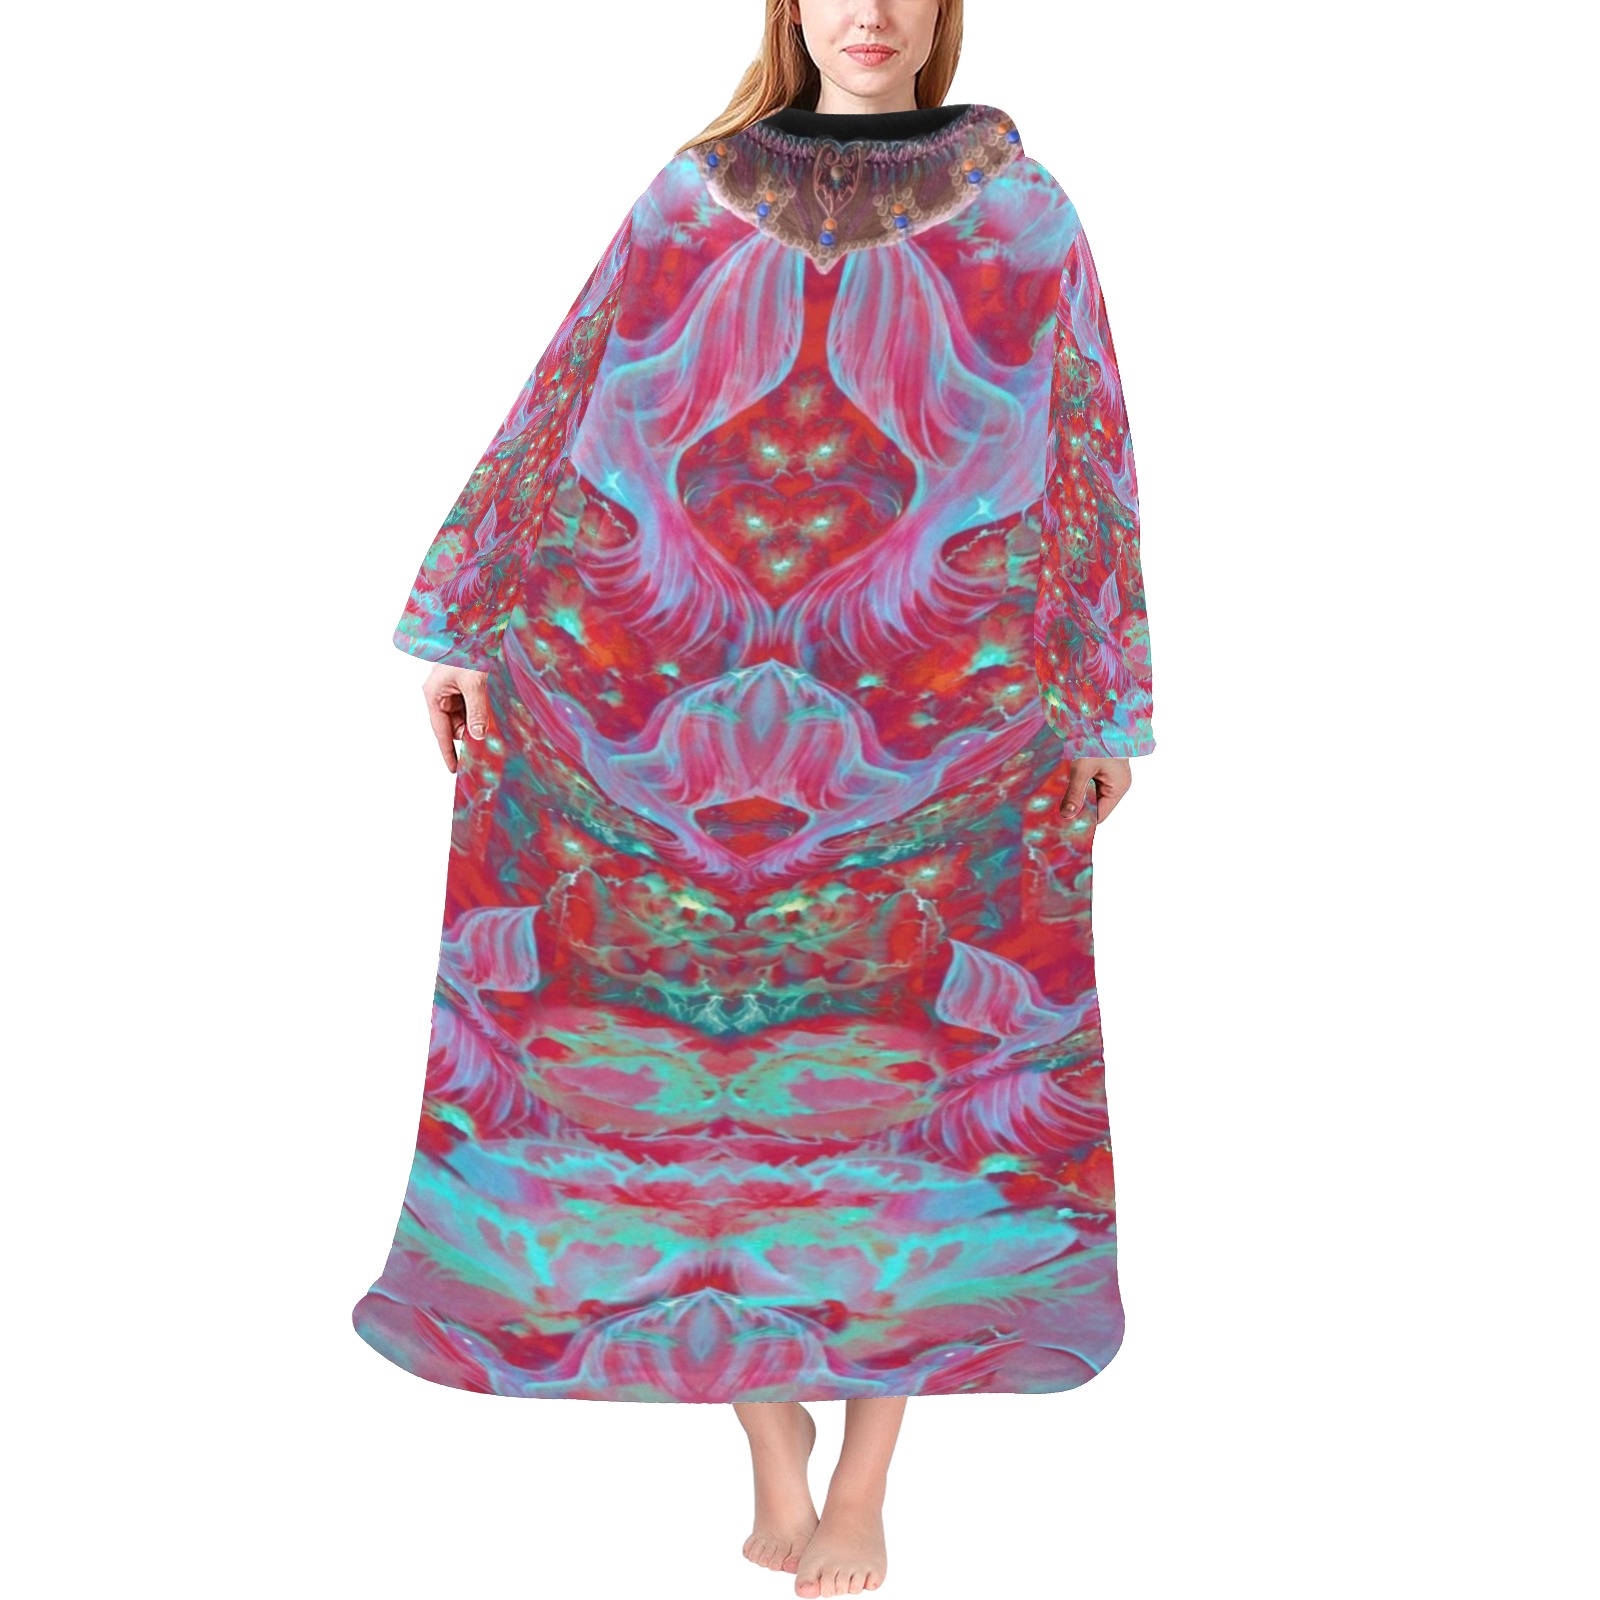 Nidhi Decembre 2014- pattern-5-1 neck back Blanket Robe with Sleeves for Adults